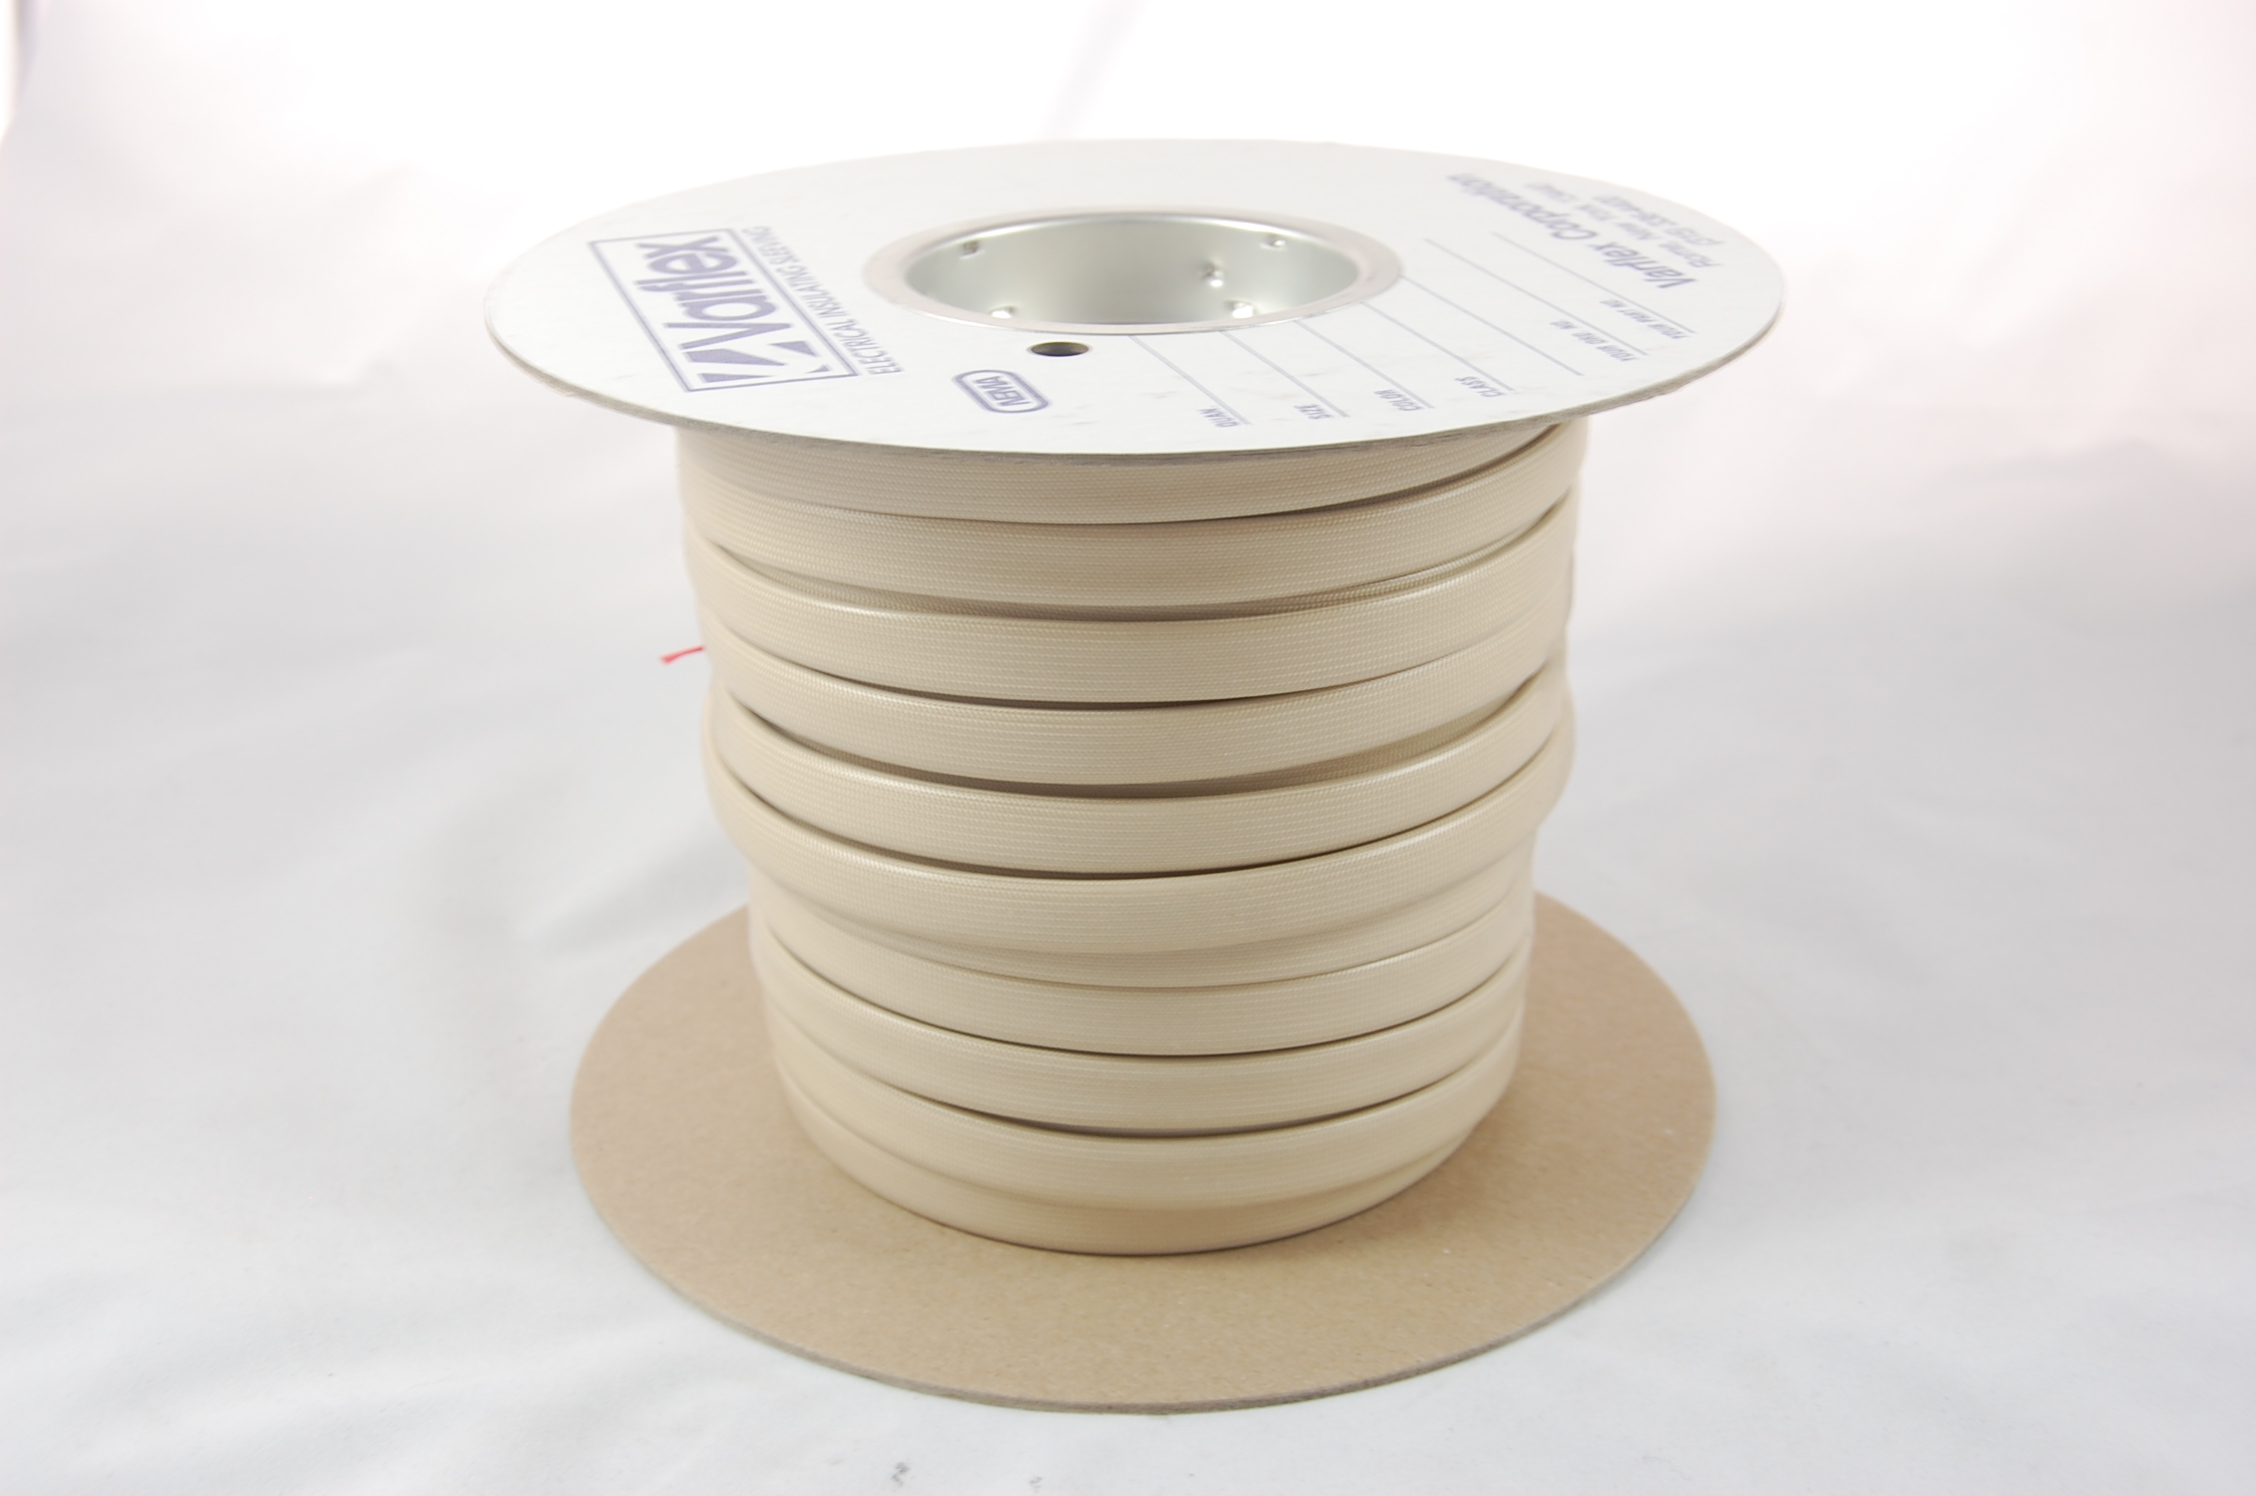 #17 AWG Varglas Silicone Rubber Grade H-A-1 (8000V) High Temperature Silicone Rubber Coated Braided Fiberglass Sleeving 200°C, natural, 500 FT per spool